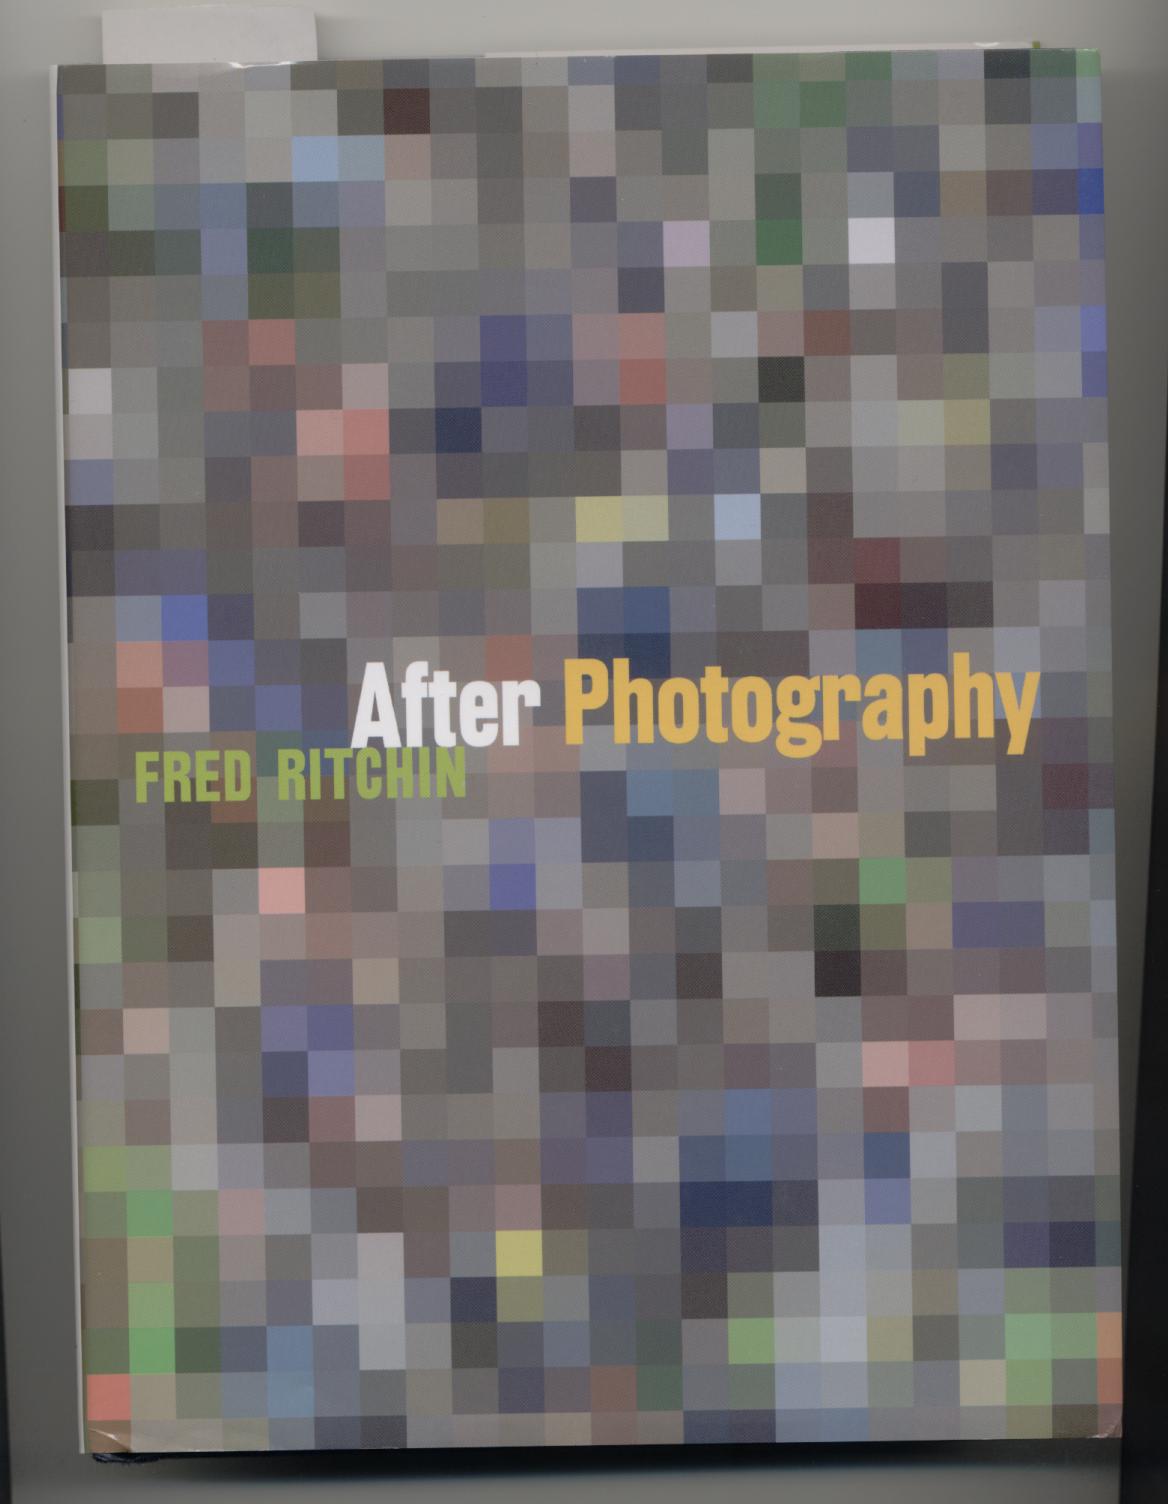 [After+Photography.jpg]